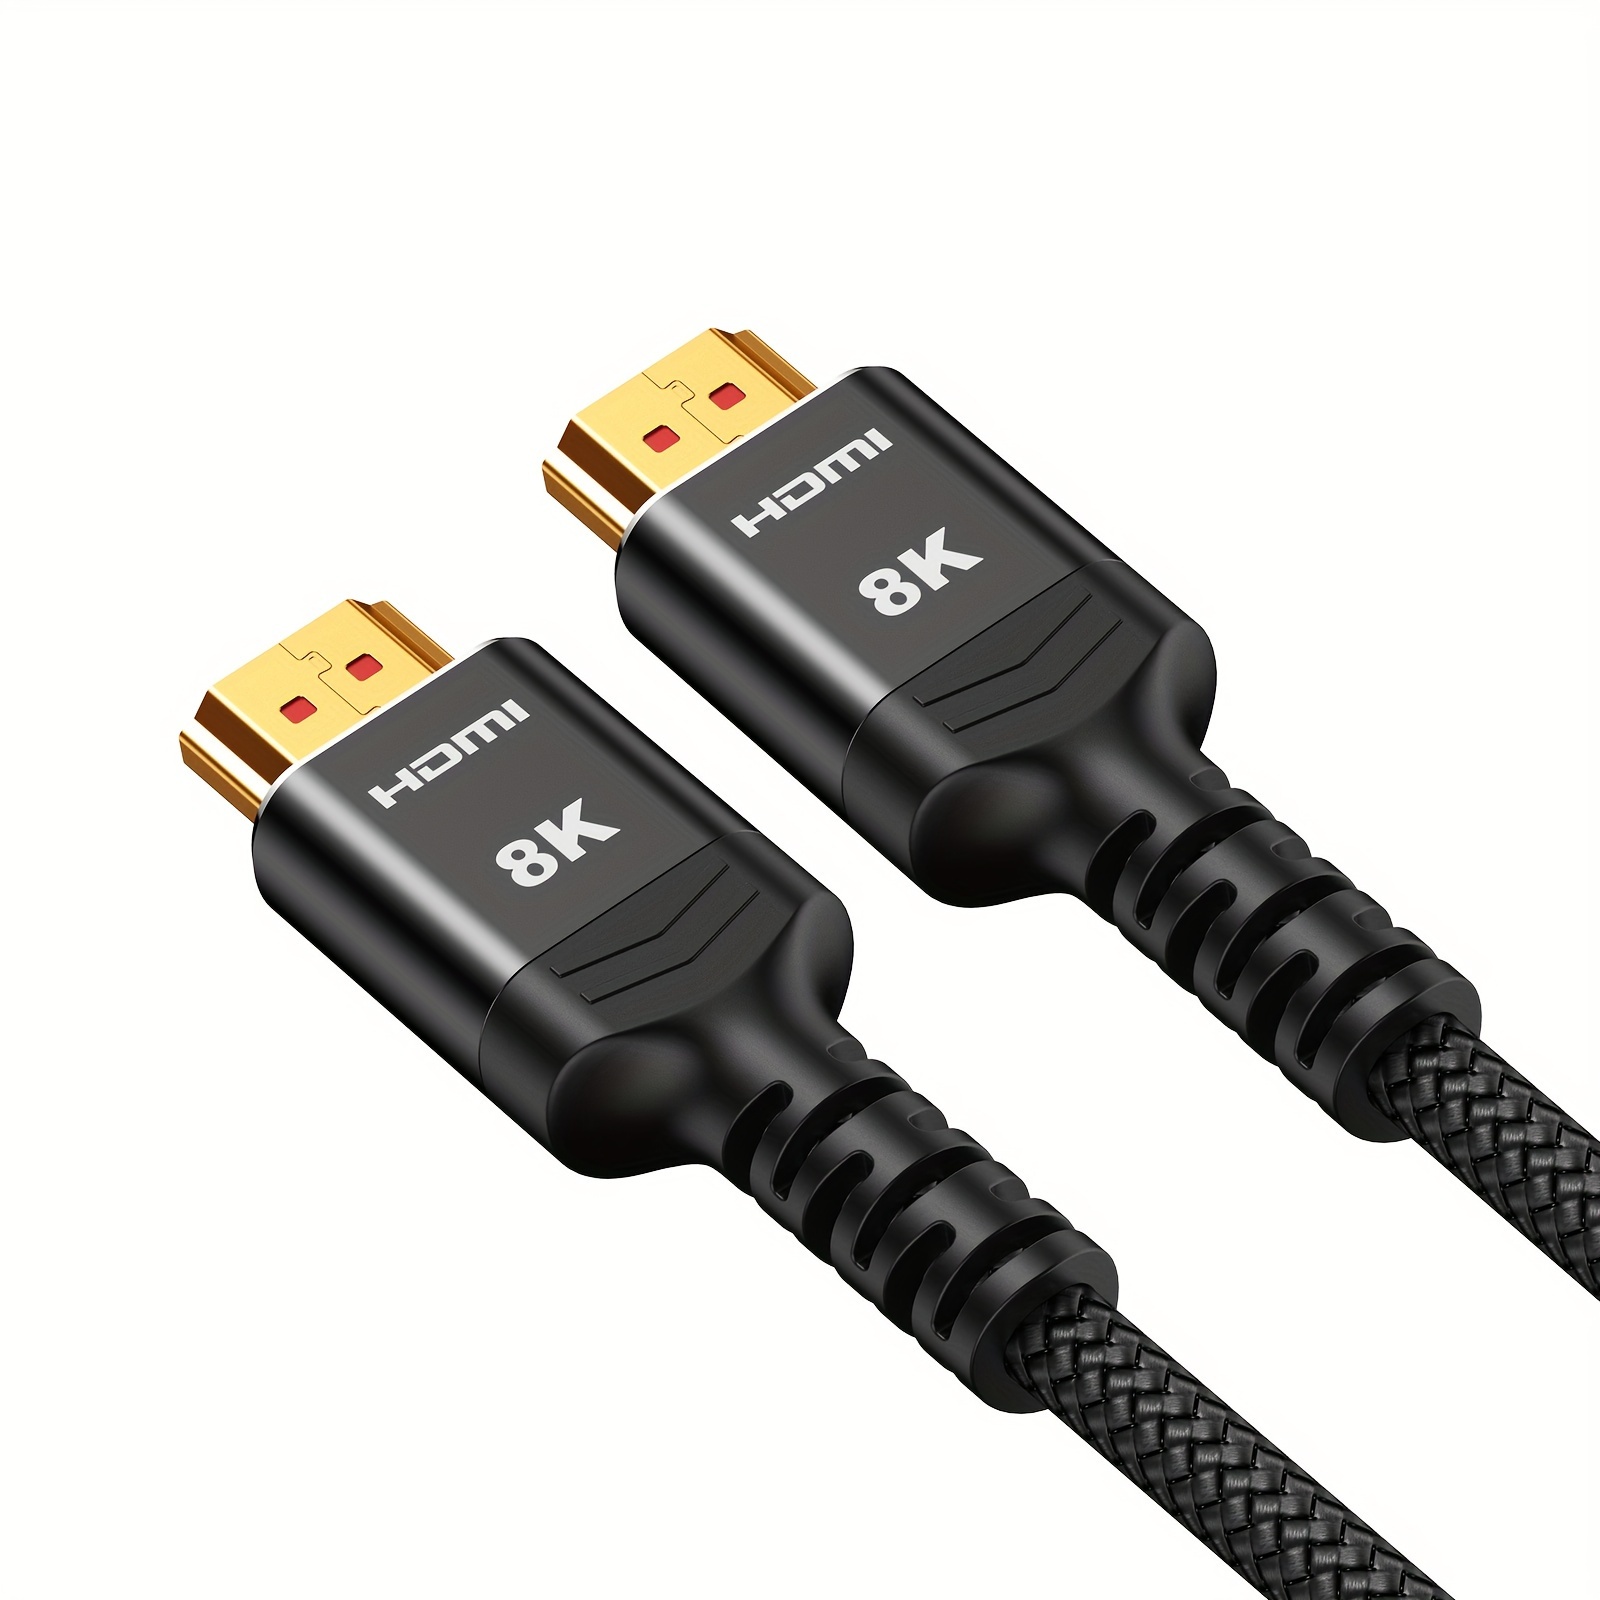 8K HDMI Cable 2.1, 6FT/2M Slim 48Gbps High Speed HDMI Braided Cord-4K@120Hz  144Hz 8K@60Hz, HDCP 2.2&2.3, Dynamic HDR,eARC,DTS:X,RTX 3090,Dolby  Compatible with Projector , Laptop , Television , Monitor 